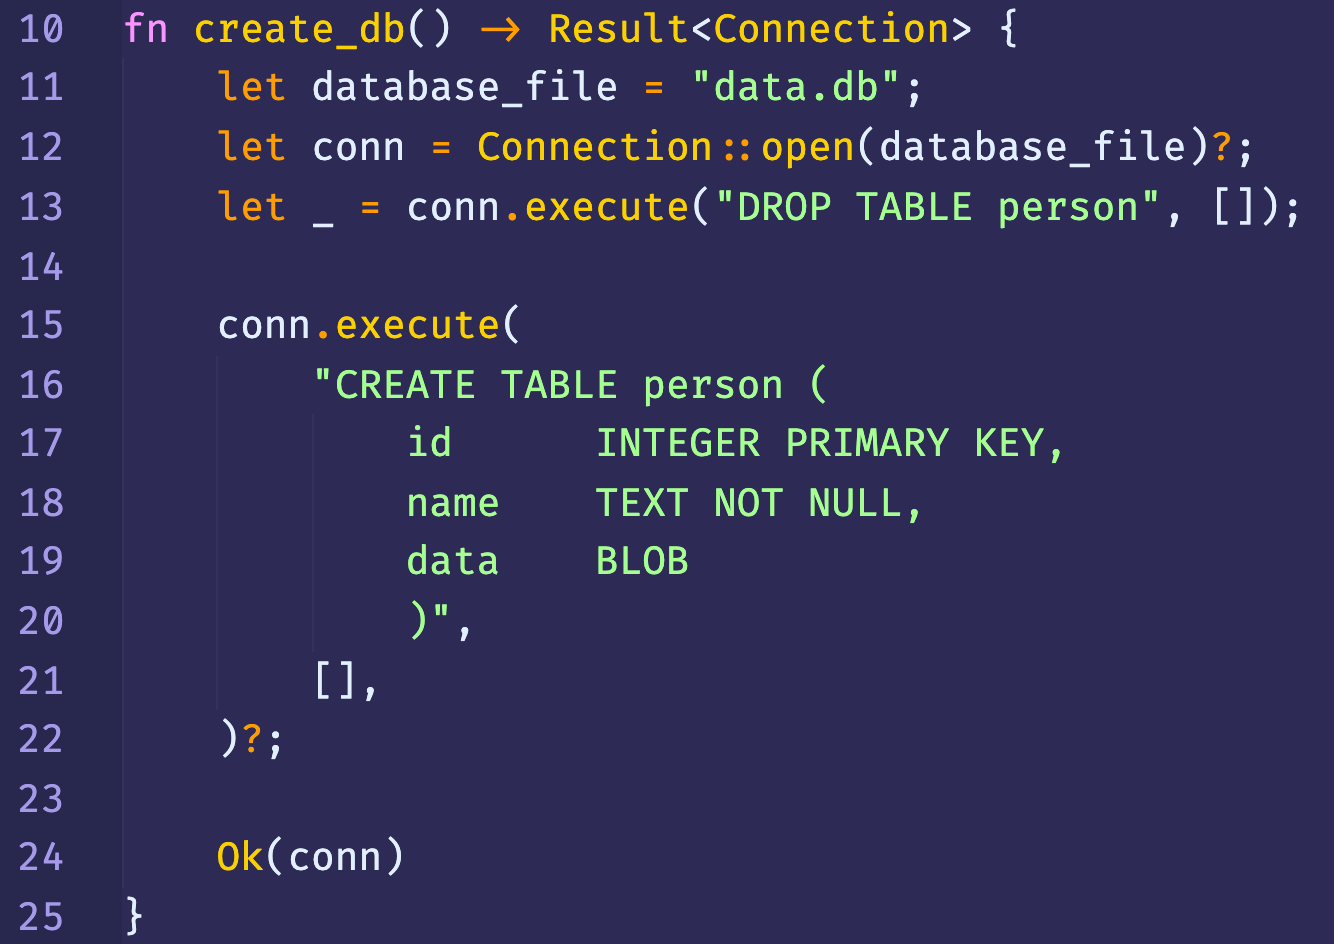 10 
11 
12 
13 
14 
15 
16 
17 
18 
19 
20 
21 
22 
23 
24 
25 
fn 
create_db() Result<Connection> { 
let 
database file 
"data. db"; 
Connection :: ; 
let conn 
let 
conn.execute( "DROP TABLE person" , 
conn. execute( 
"CREATE TABLE person ( 
id 
name 
data 
a, 
Ok(conn) 
INTEGER PRIMARY KEY, 
TEXT NOT NULL, 
BLOB 